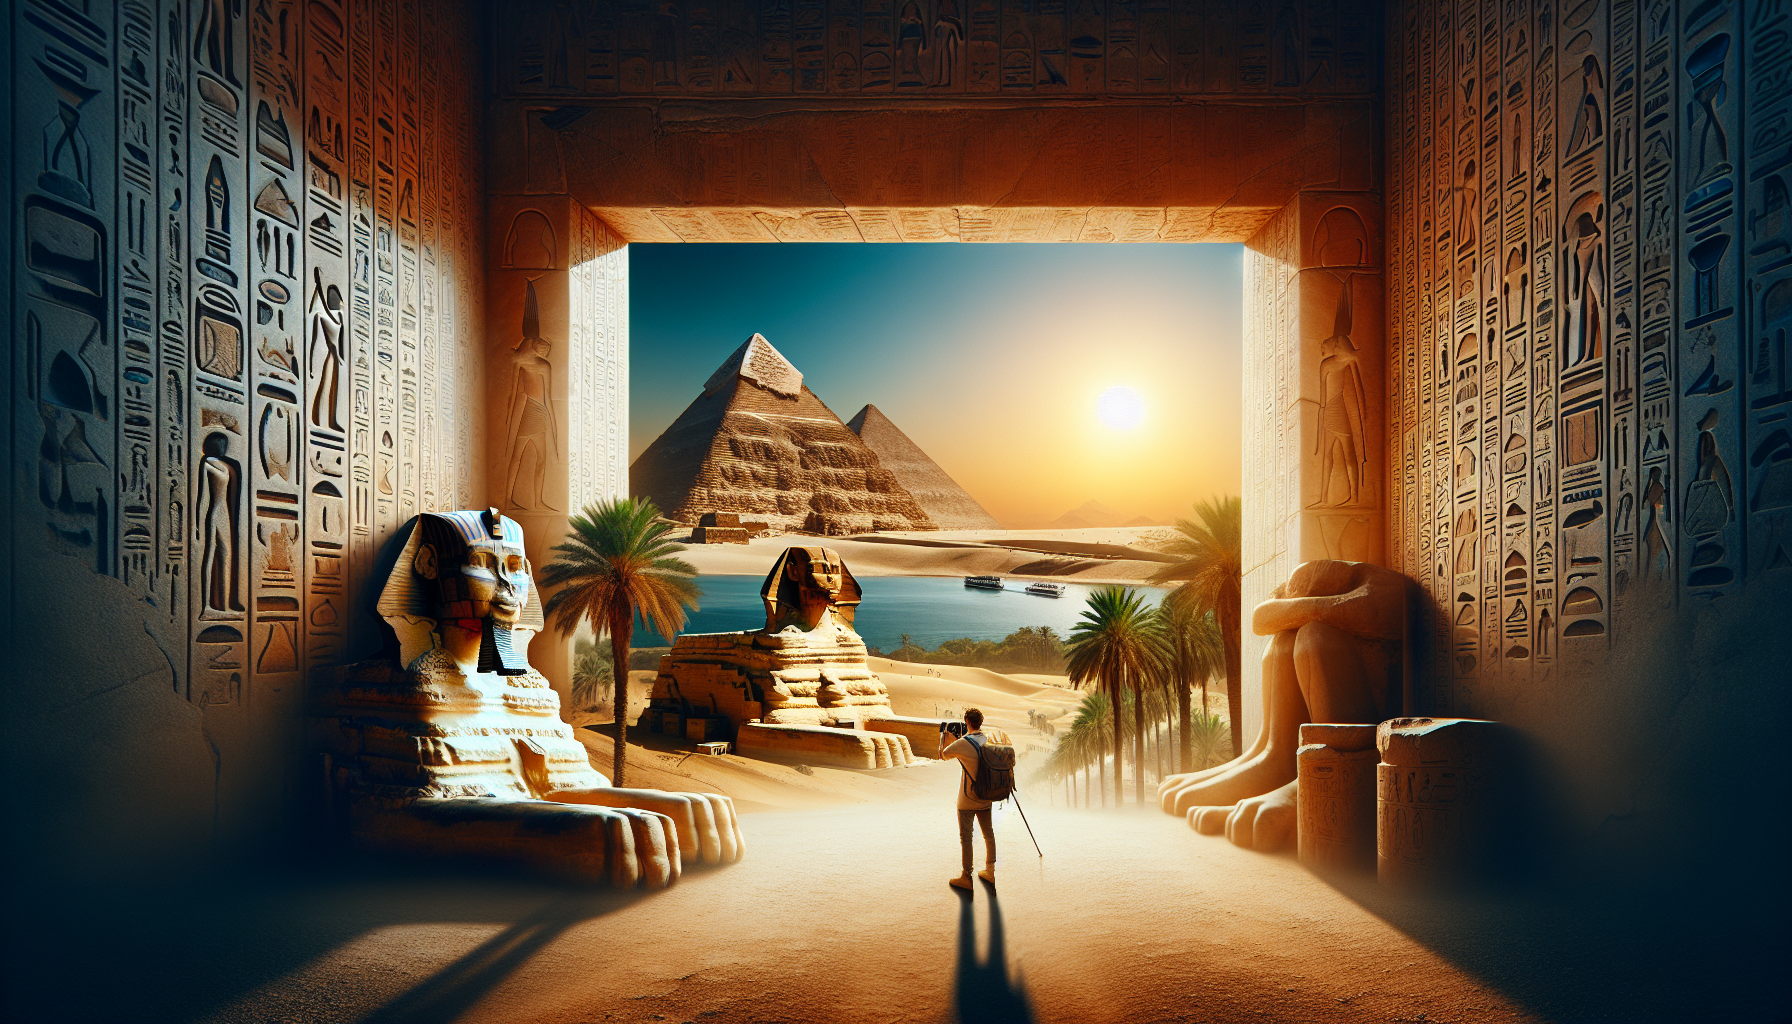 explore the wonders of egypt's ancient civilization with our tourism guide. plan your trip to discover the rich history, magnificent monuments, and enchanting culture of this fascinating destination.